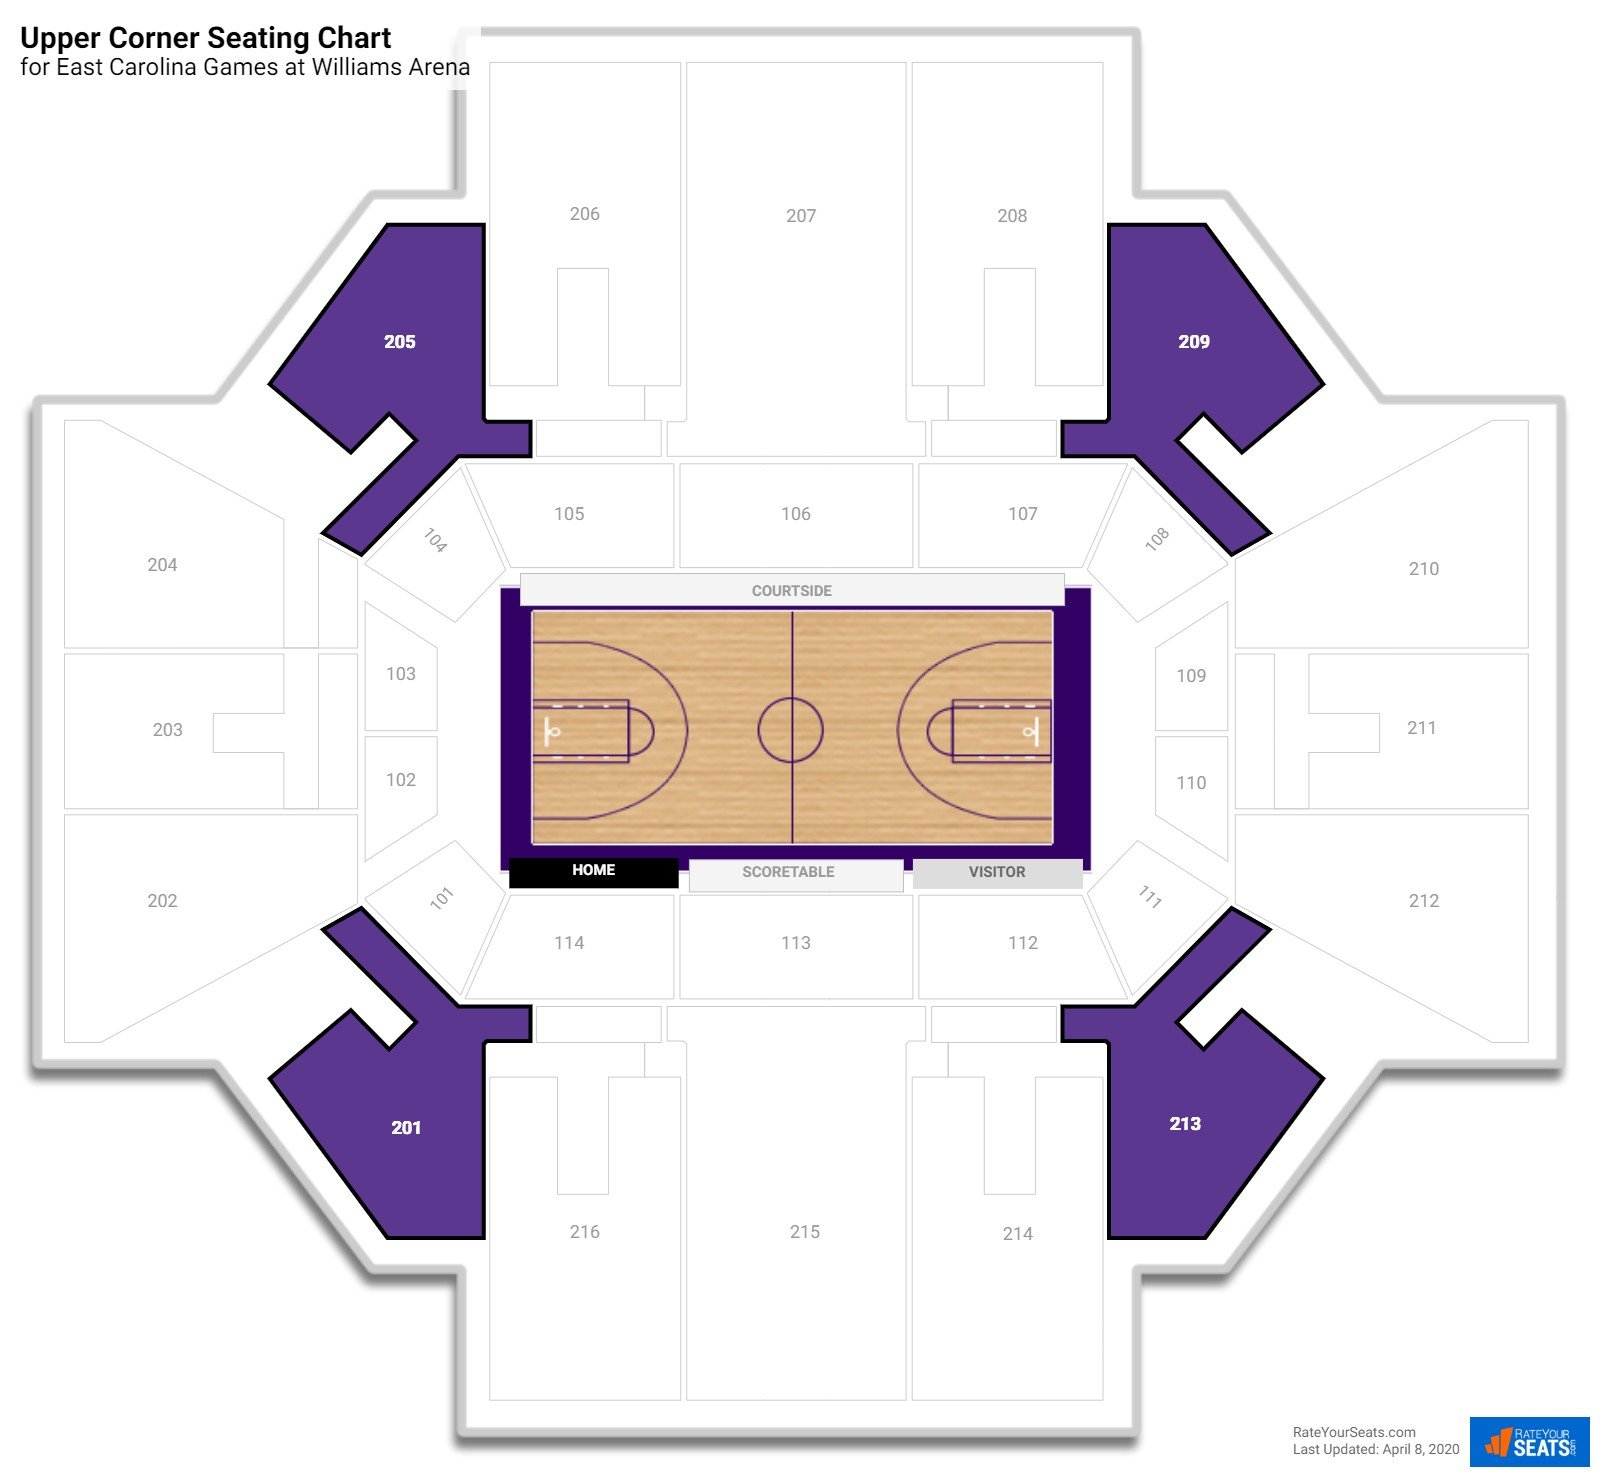 Williams Arena Seating Chart